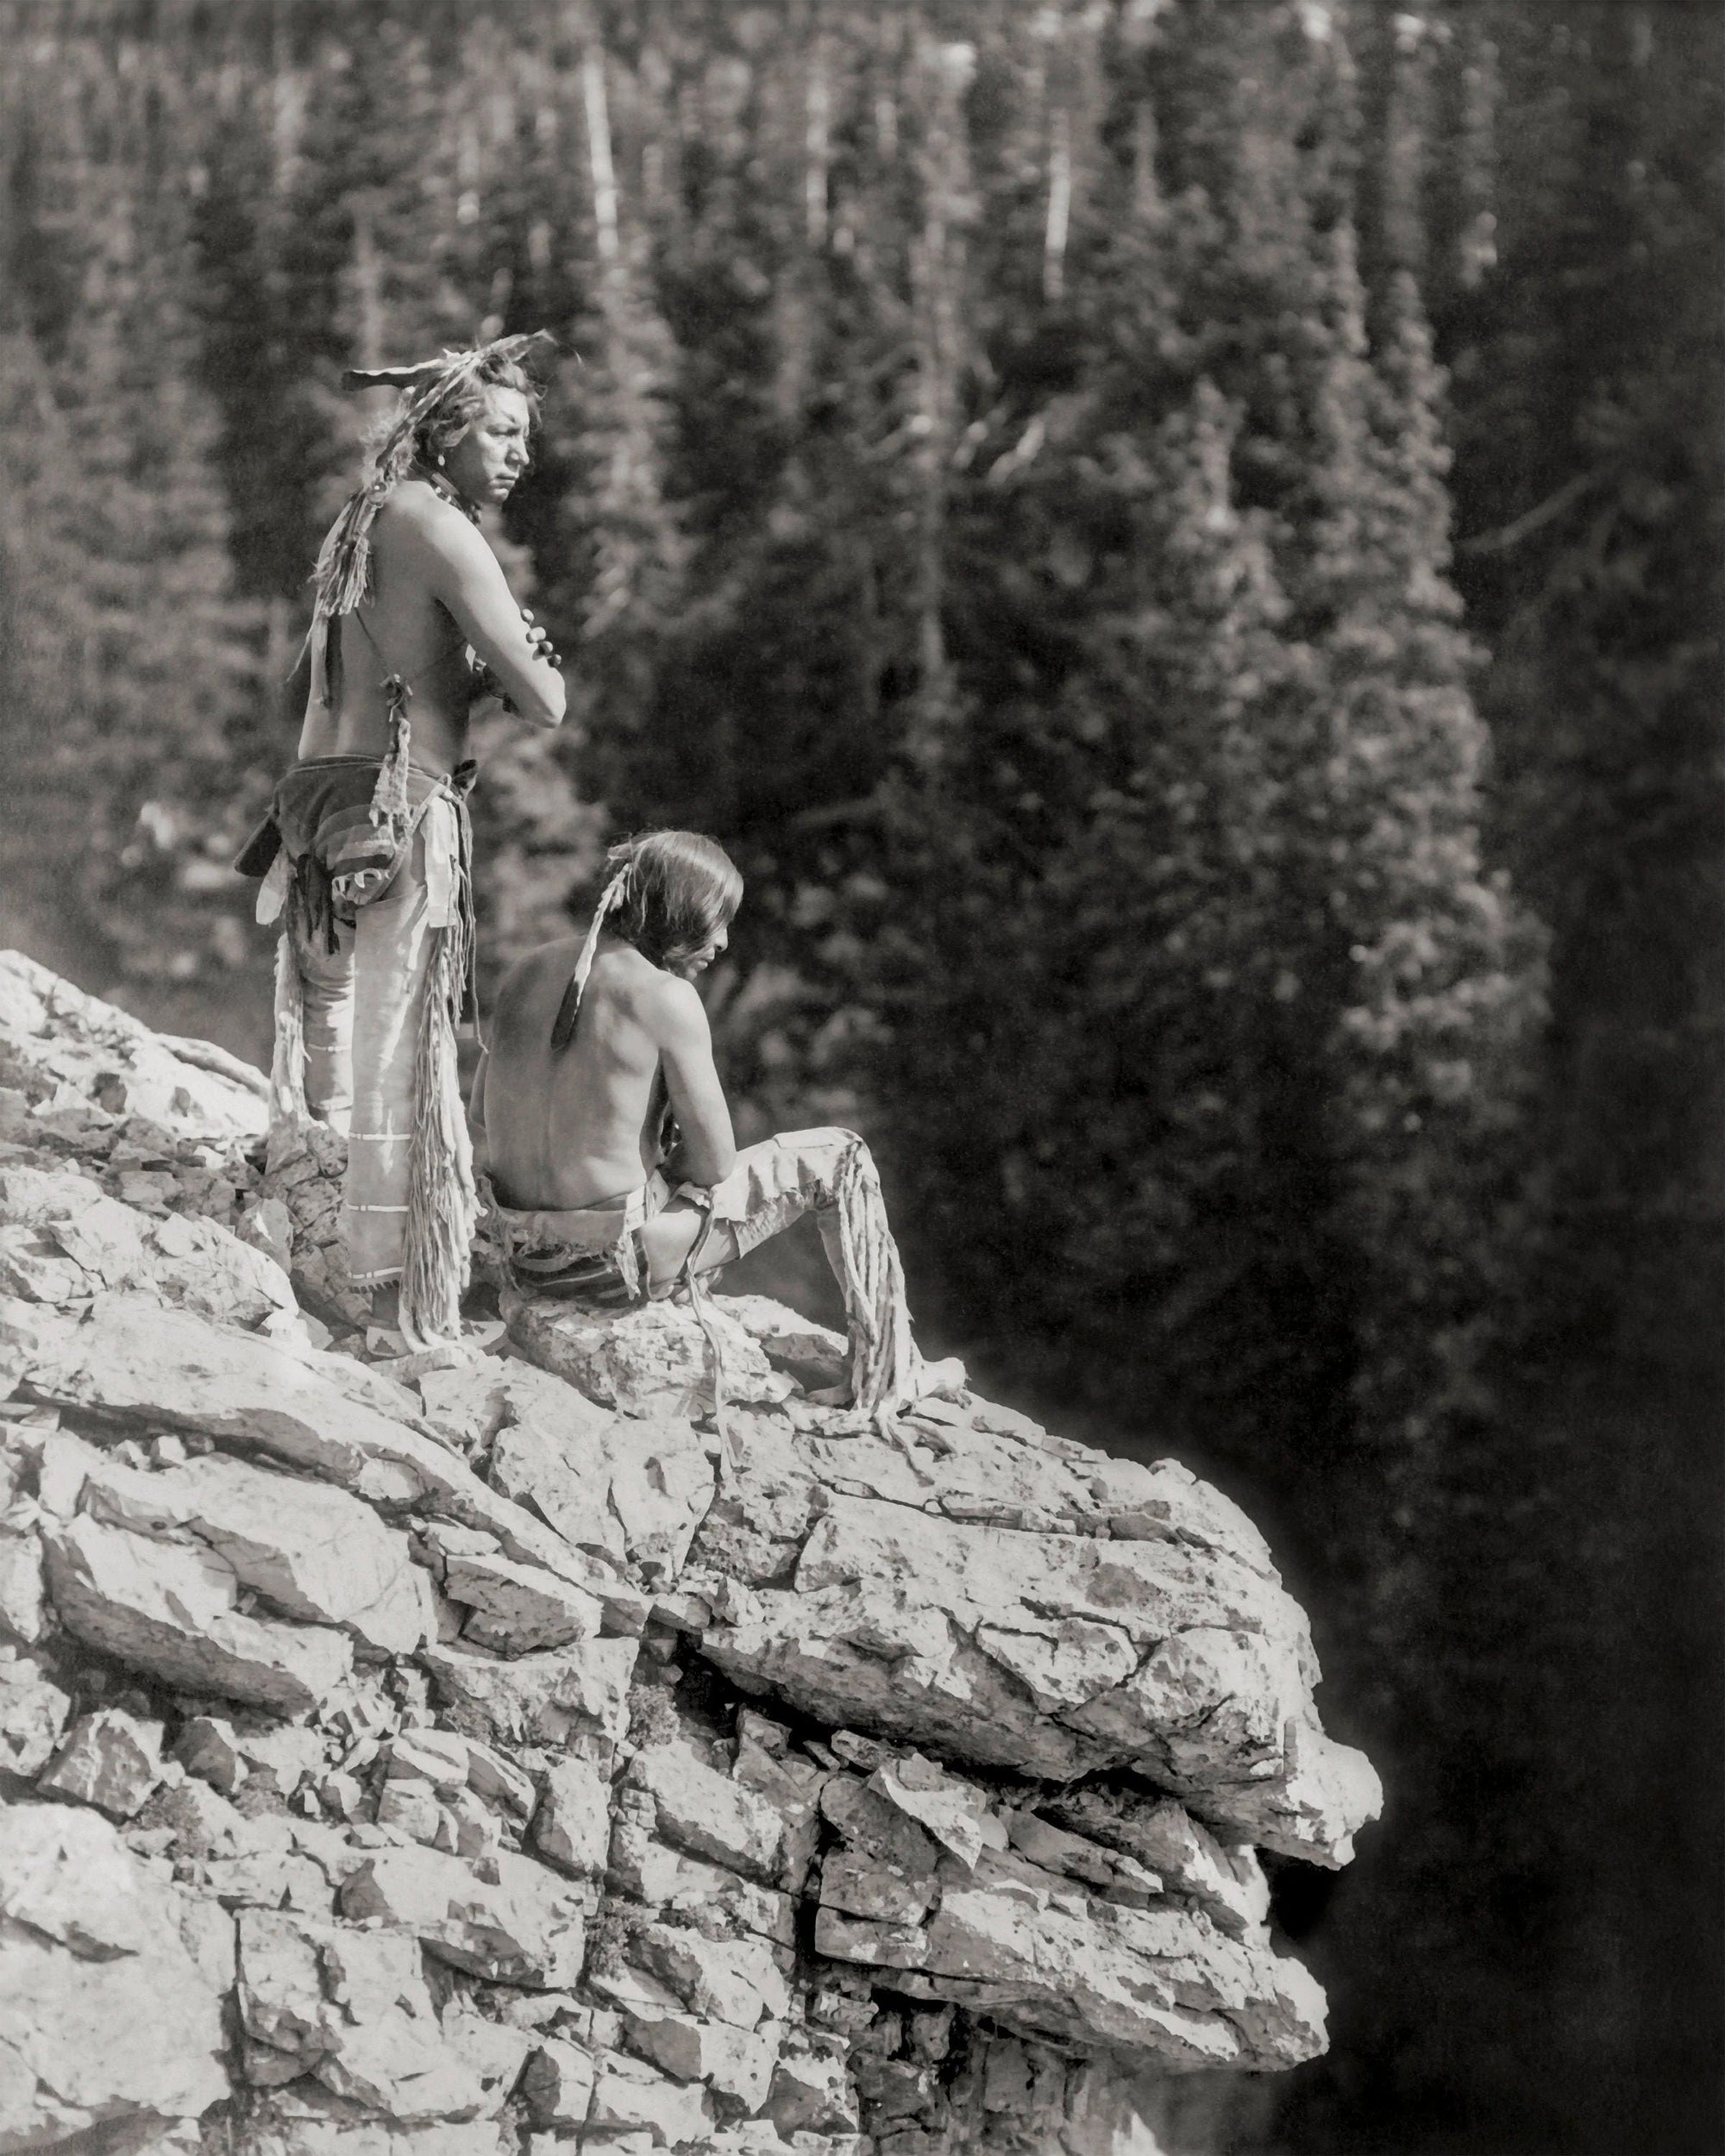 Roland Reed, A Photographer of Native Americans Historical Pix